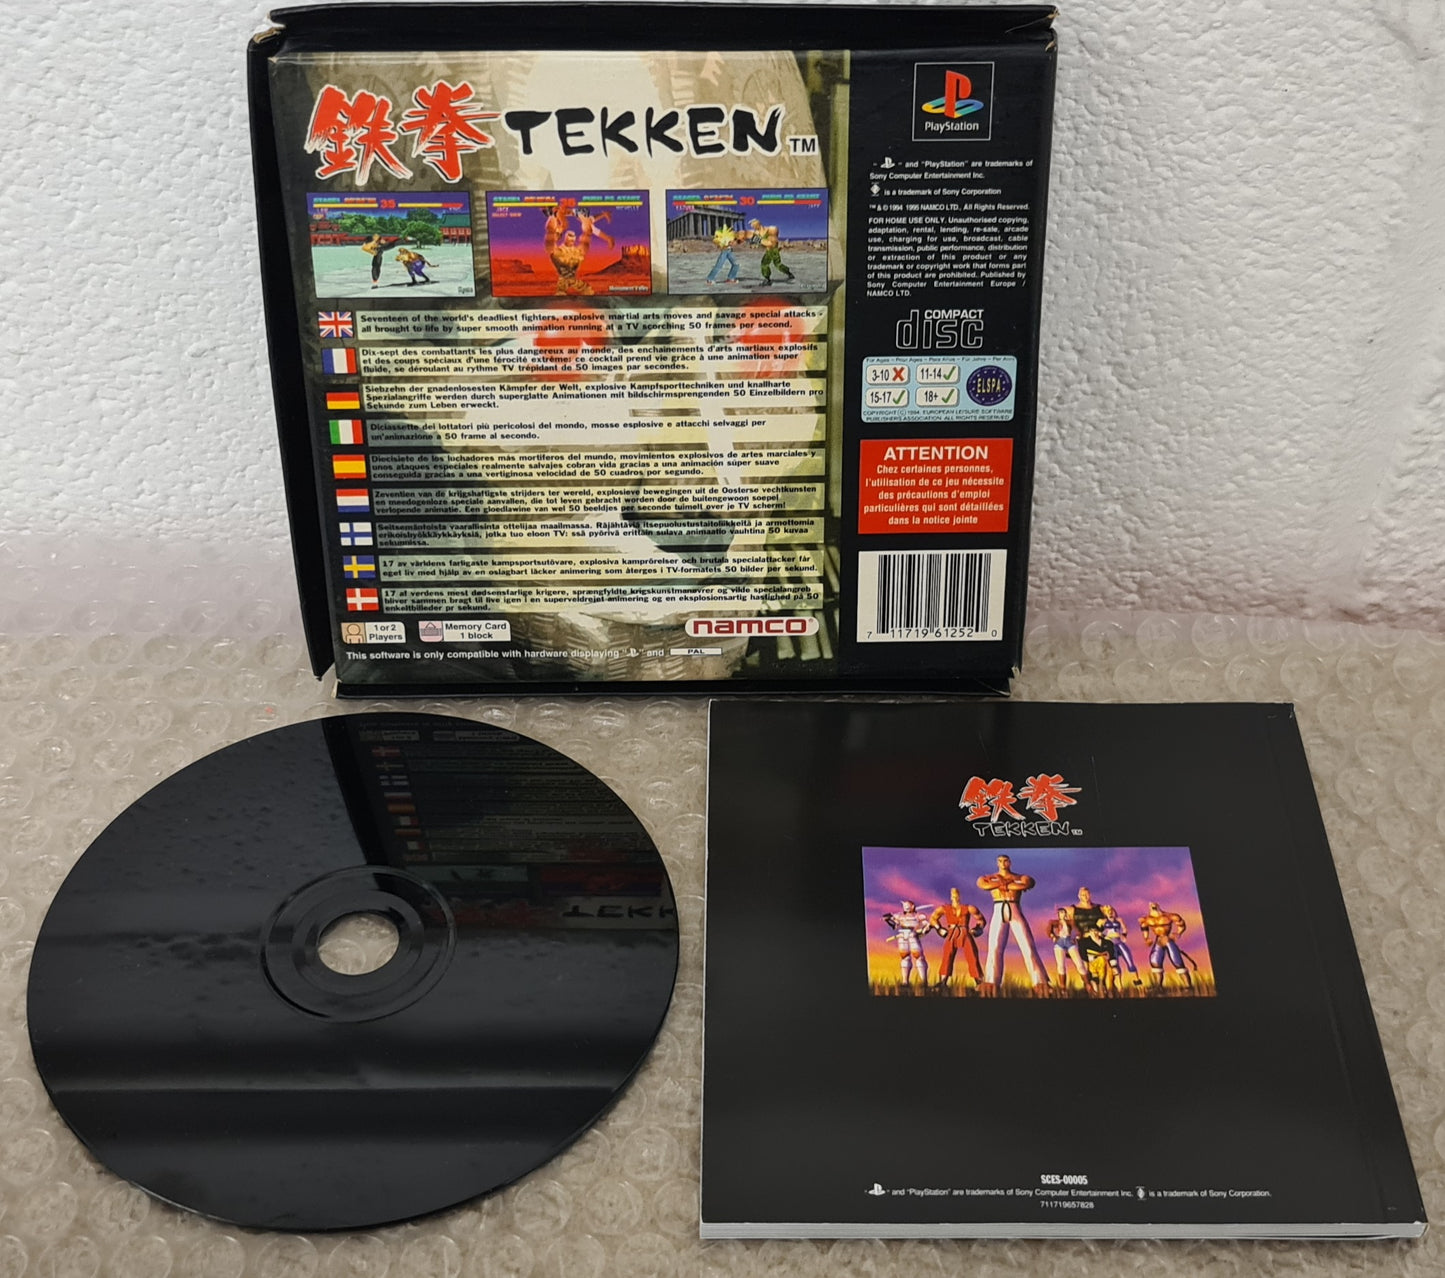 Tekken in RARE Card Case PS1 (Sony Playstation 1) Game